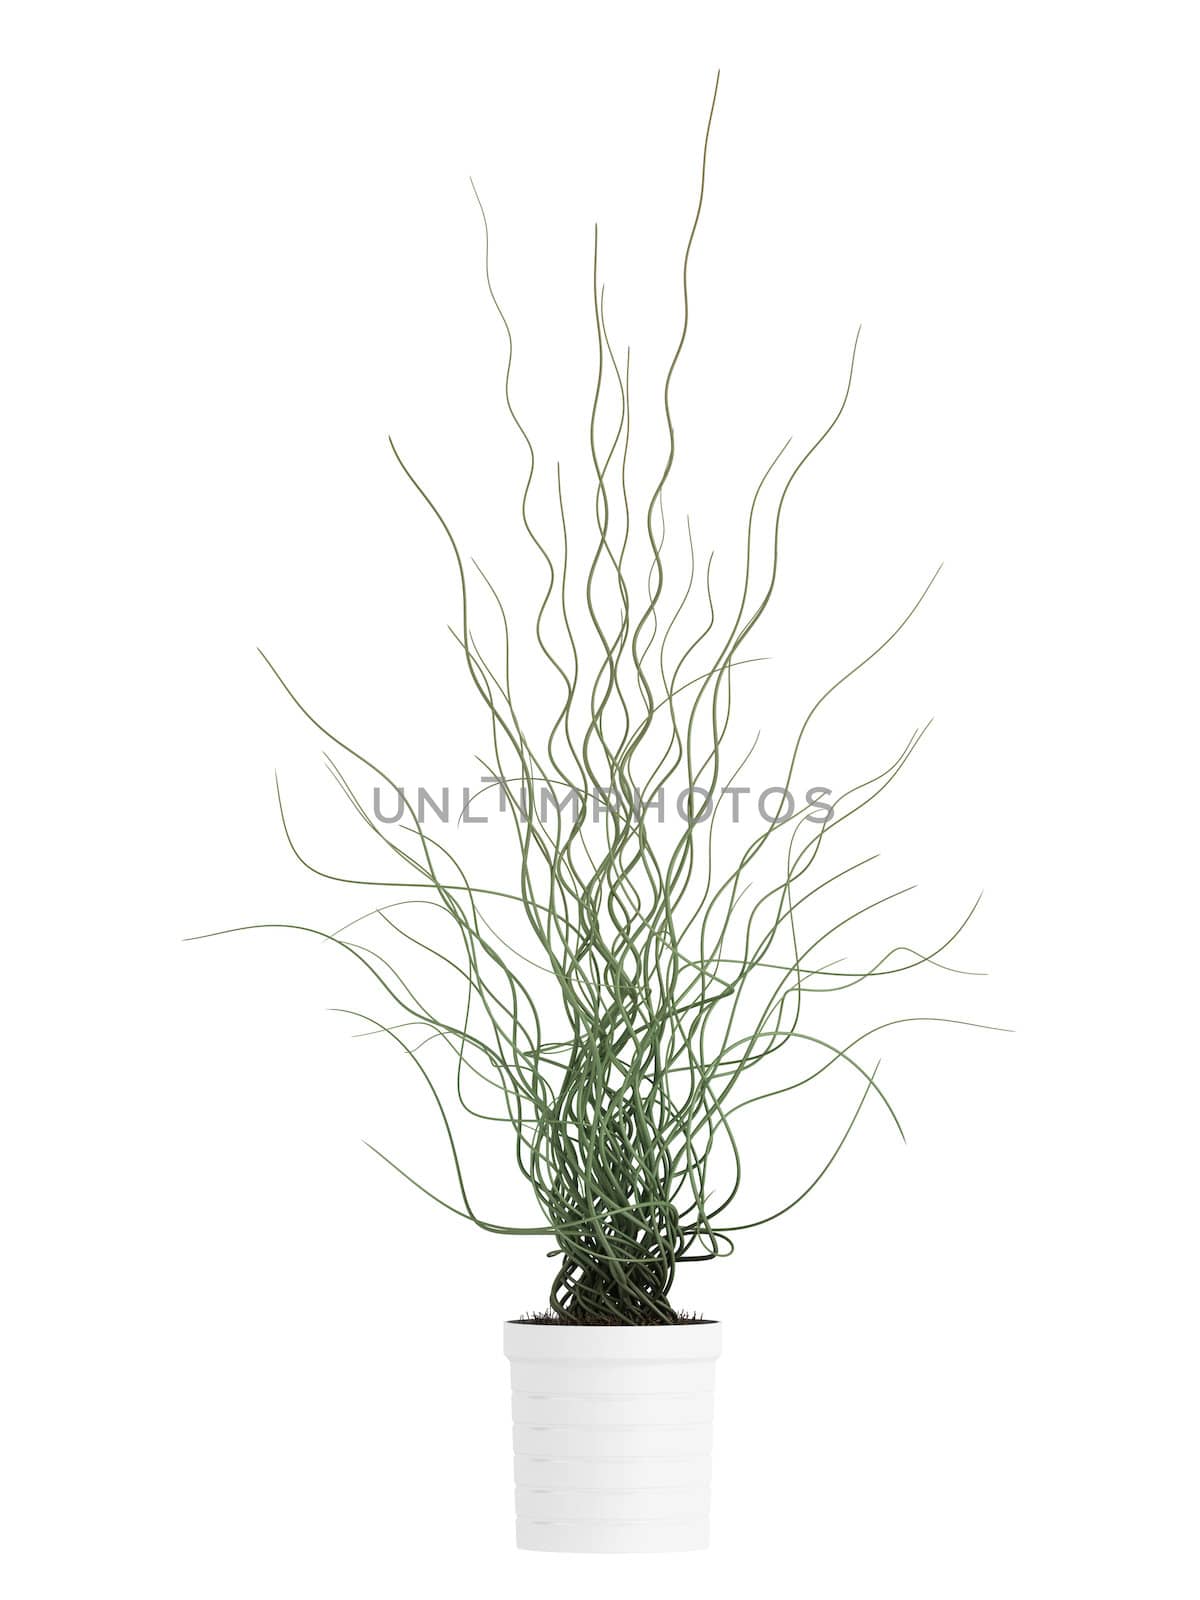 Ornamental juncus houseplant, a member of the grassy rushes family, with a crinkled wavy stem isolated on white